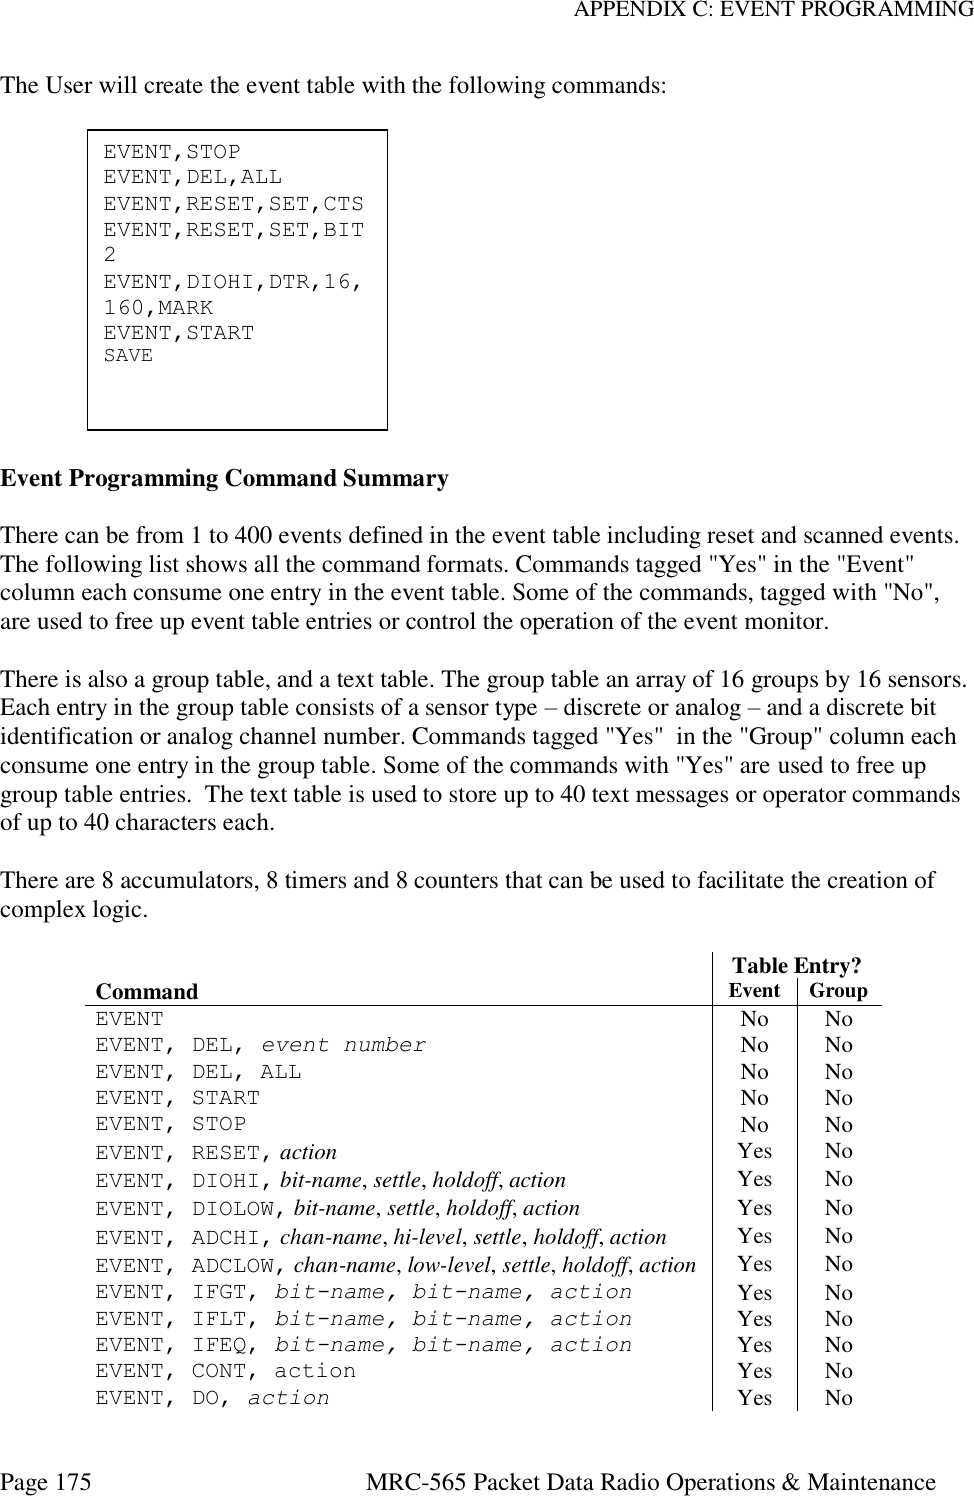 APPENDIX C: EVENT PROGRAMMING Page 175  MRC-565 Packet Data Radio Operations &amp; Maintenance The User will create the event table with the following commands:              Event Programming Command Summary  There can be from 1 to 400 events defined in the event table including reset and scanned events. The following list shows all the command formats. Commands tagged &quot;Yes&quot; in the &quot;Event&quot; column each consume one entry in the event table. Some of the commands, tagged with &quot;No&quot;, are used to free up event table entries or control the operation of the event monitor.  There is also a group table, and a text table. The group table an array of 16 groups by 16 sensors.  Each entry in the group table consists of a sensor type – discrete or analog – and a discrete bit identification or analog channel number. Commands tagged &quot;Yes&quot;  in the &quot;Group&quot; column each consume one entry in the group table. Some of the commands with &quot;Yes&quot; are used to free up group table entries.  The text table is used to store up to 40 text messages or operator commands of up to 40 characters each.  There are 8 accumulators, 8 timers and 8 counters that can be used to facilitate the creation of complex logic.   Table Entry? Command Event Group EVENT No No EVENT, DEL, event number No No EVENT, DEL, ALL No No EVENT, START No No EVENT, STOP No No EVENT, RESET, action Yes No EVENT, DIOHI, bit-name, settle, holdoff, action Yes No EVENT, DIOLOW, bit-name, settle, holdoff, action Yes No EVENT, ADCHI, chan-name, hi-level, settle, holdoff, action Yes No EVENT, ADCLOW, chan-name, low-level, settle, holdoff, action Yes No EVENT, IFGT, bit-name, bit-name, action Yes No EVENT, IFLT, bit-name, bit-name, action Yes No EVENT, IFEQ, bit-name, bit-name, action Yes No EVENT, CONT, action Yes No EVENT, DO, action Yes No EVENT,STOP EVENT,DEL,ALL EVENT,RESET,SET,CTS EVENT,RESET,SET,BIT2 EVENT,DIOHI,DTR,16,160,MARK EVENT,START SAVE 